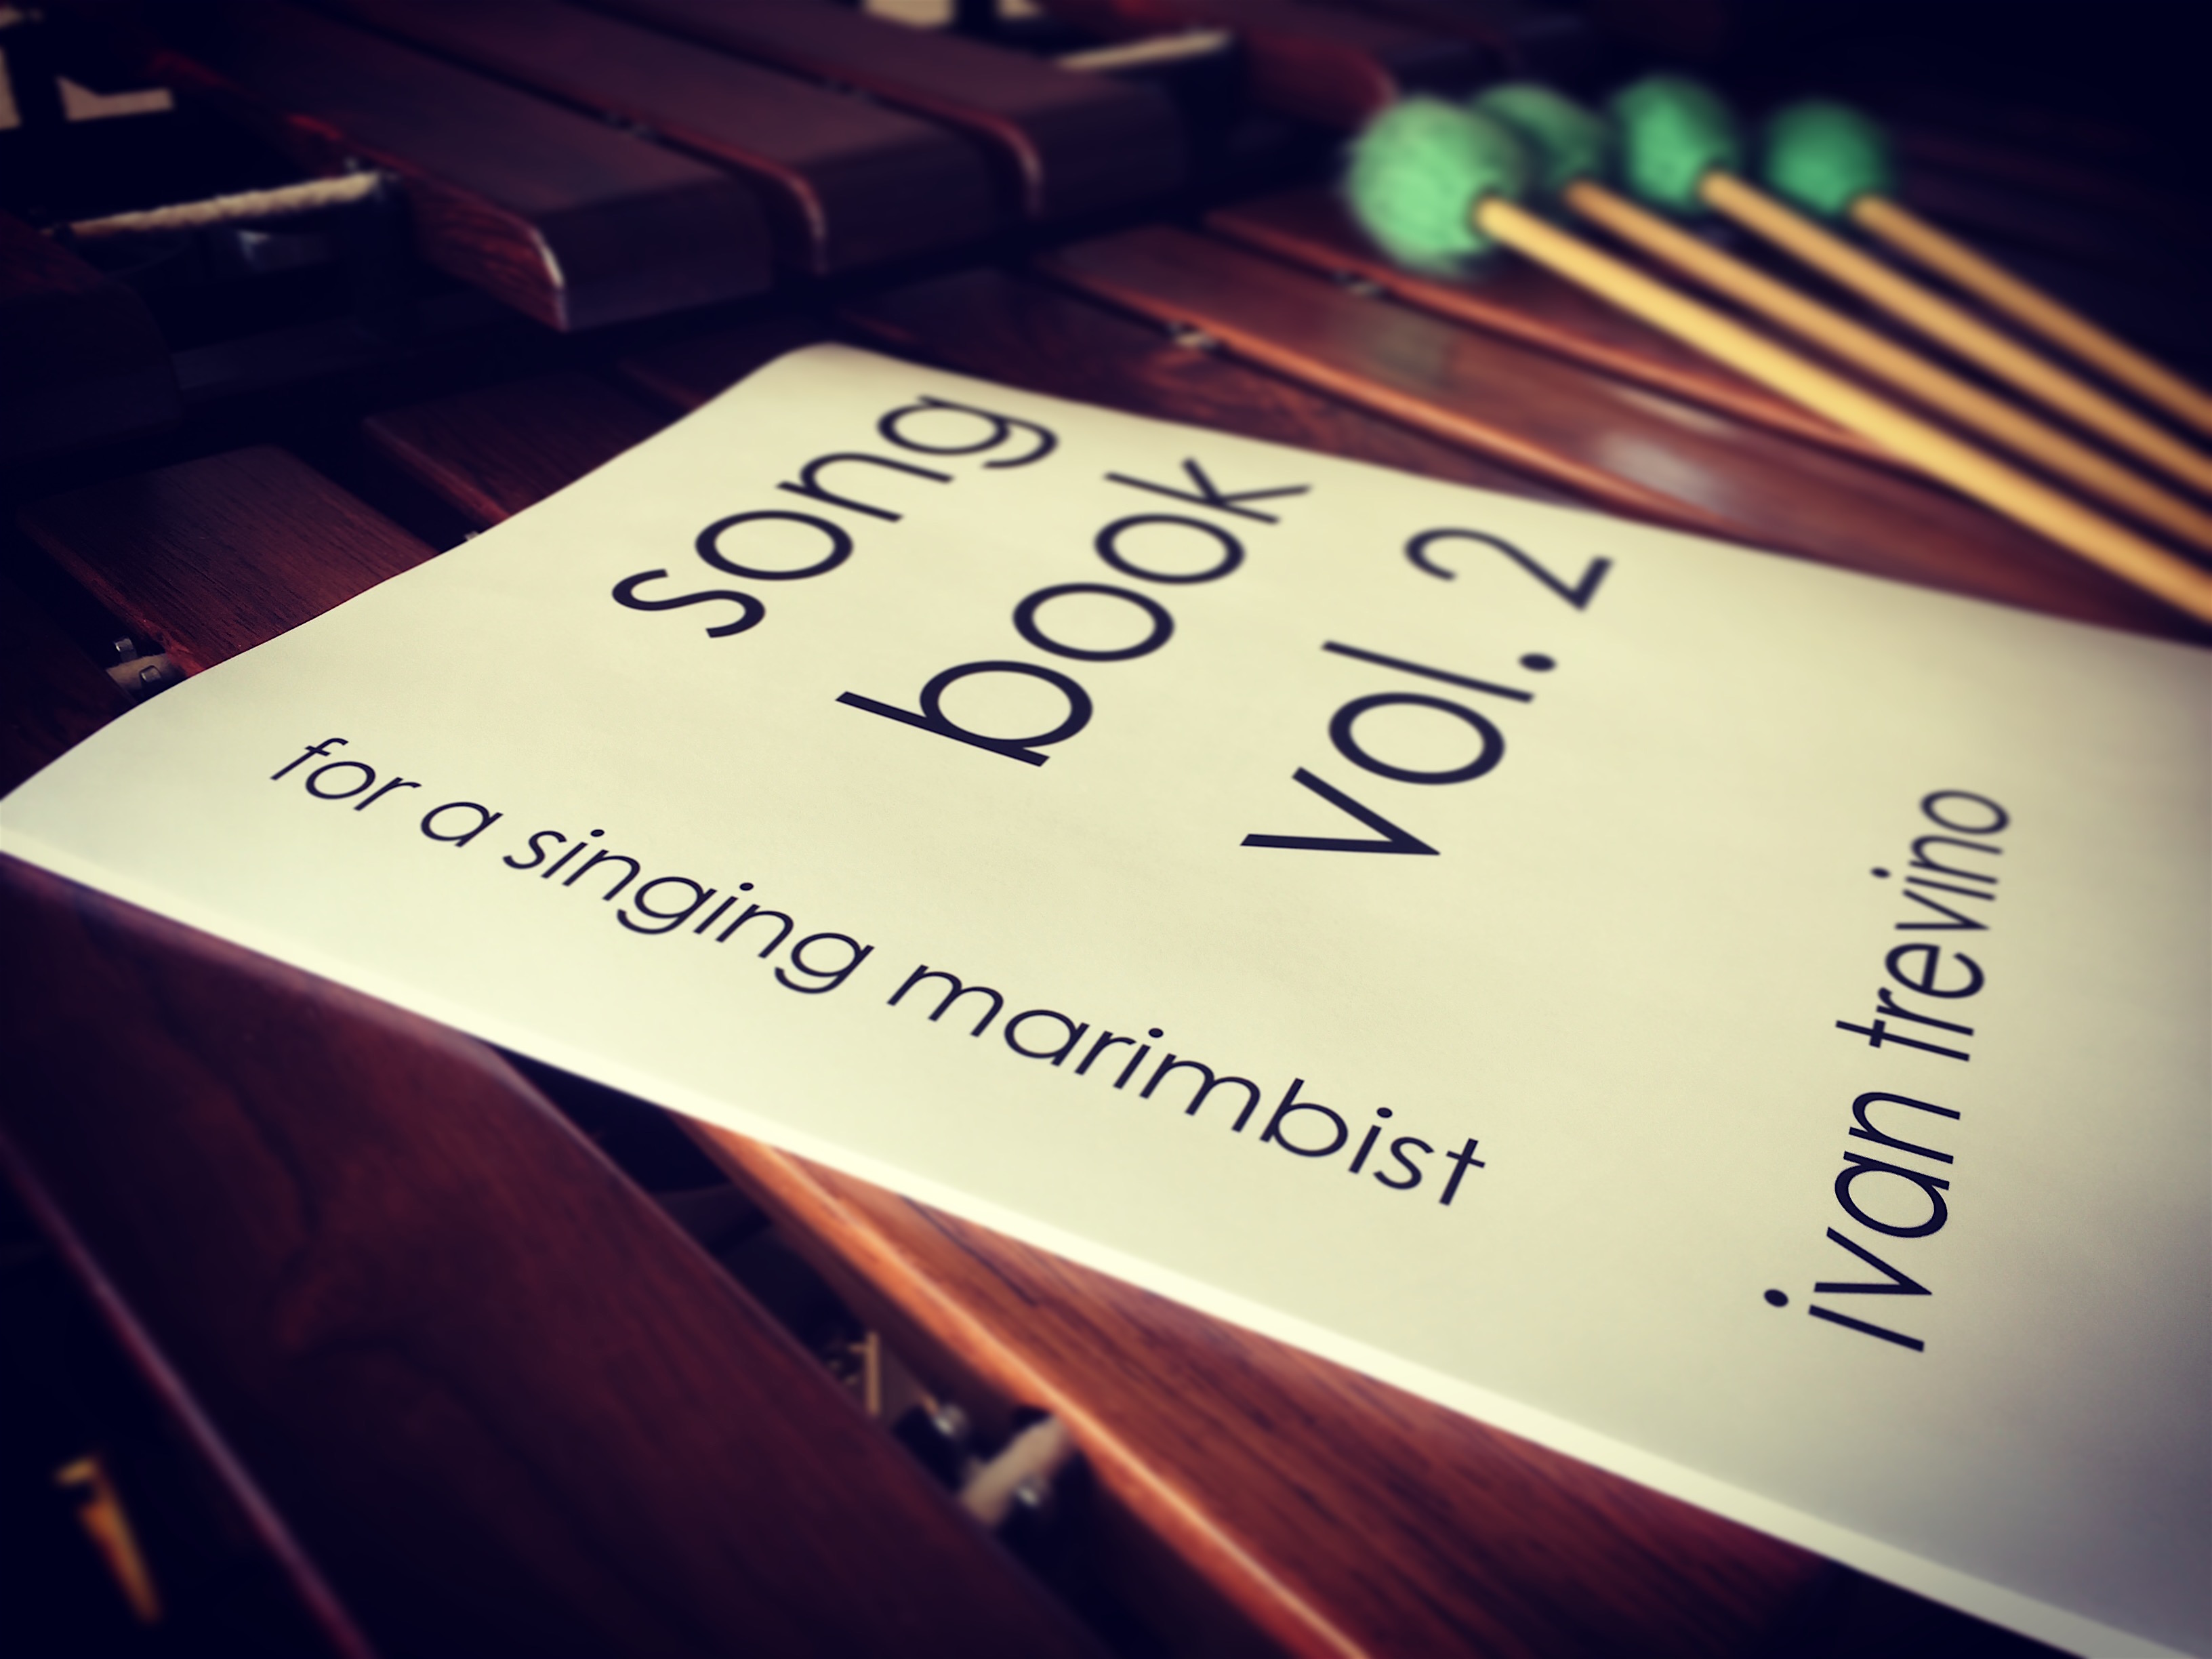 NEW RELEASE: Song Book, Vol. 2 for a singing marimbist